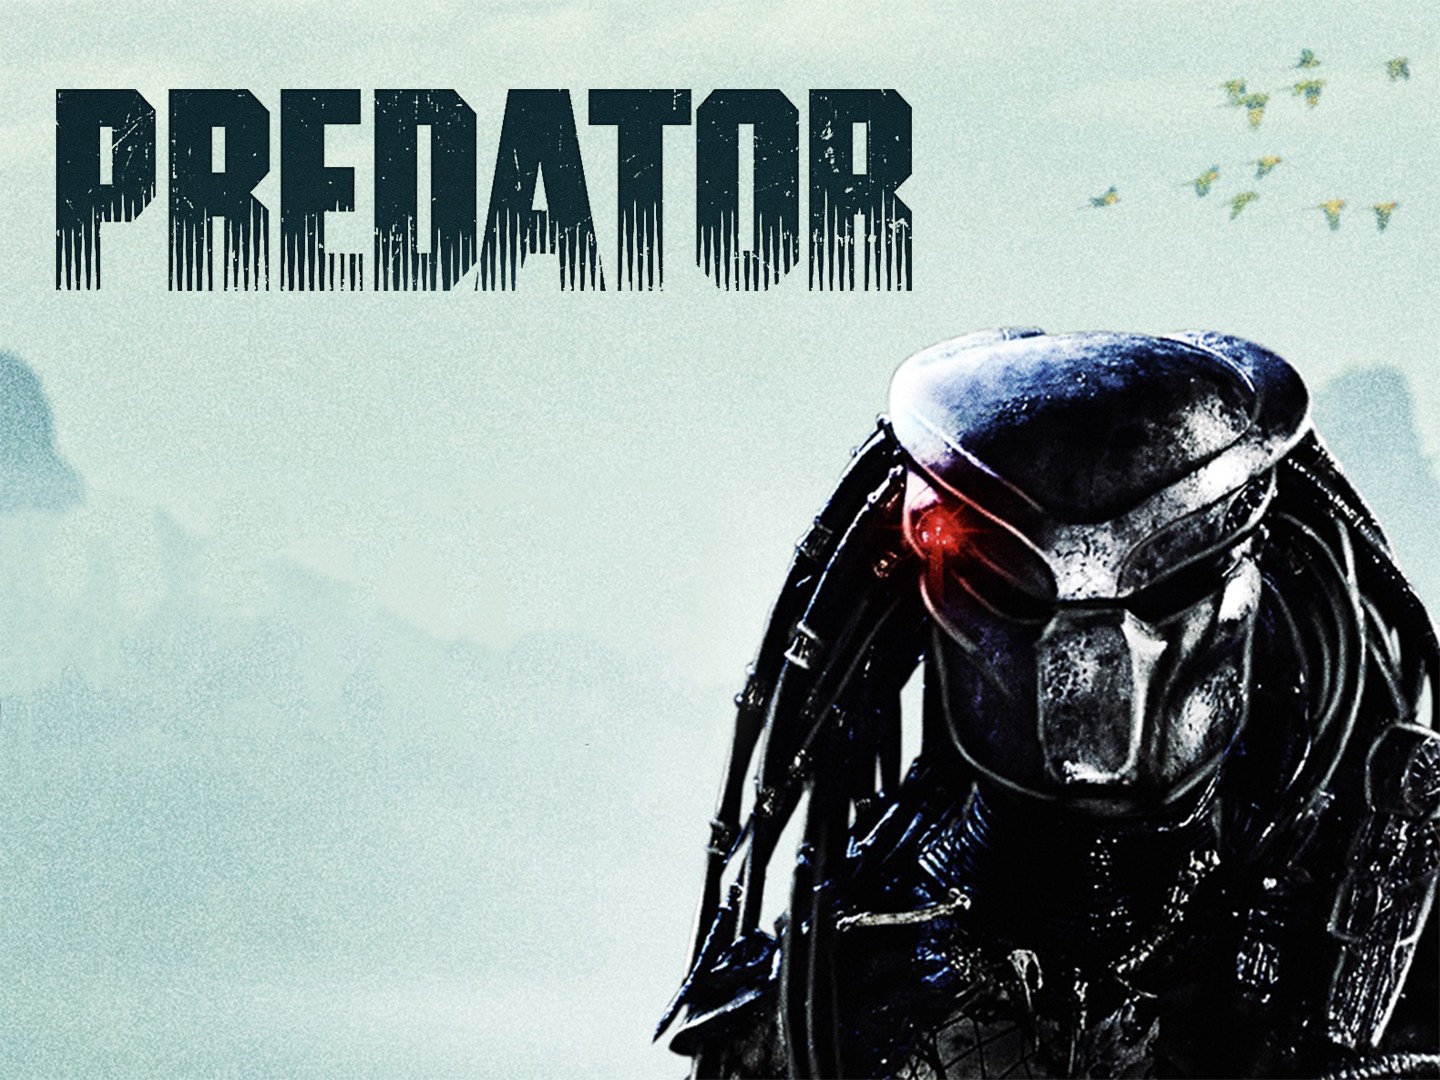 IGN on X: Prey is currently the highest rated film in the Predator  franchise on Rotten Tomatoes, boasting a 92% Fresh Rating, followed by the  original Predator, which is rated 80% Fresh.